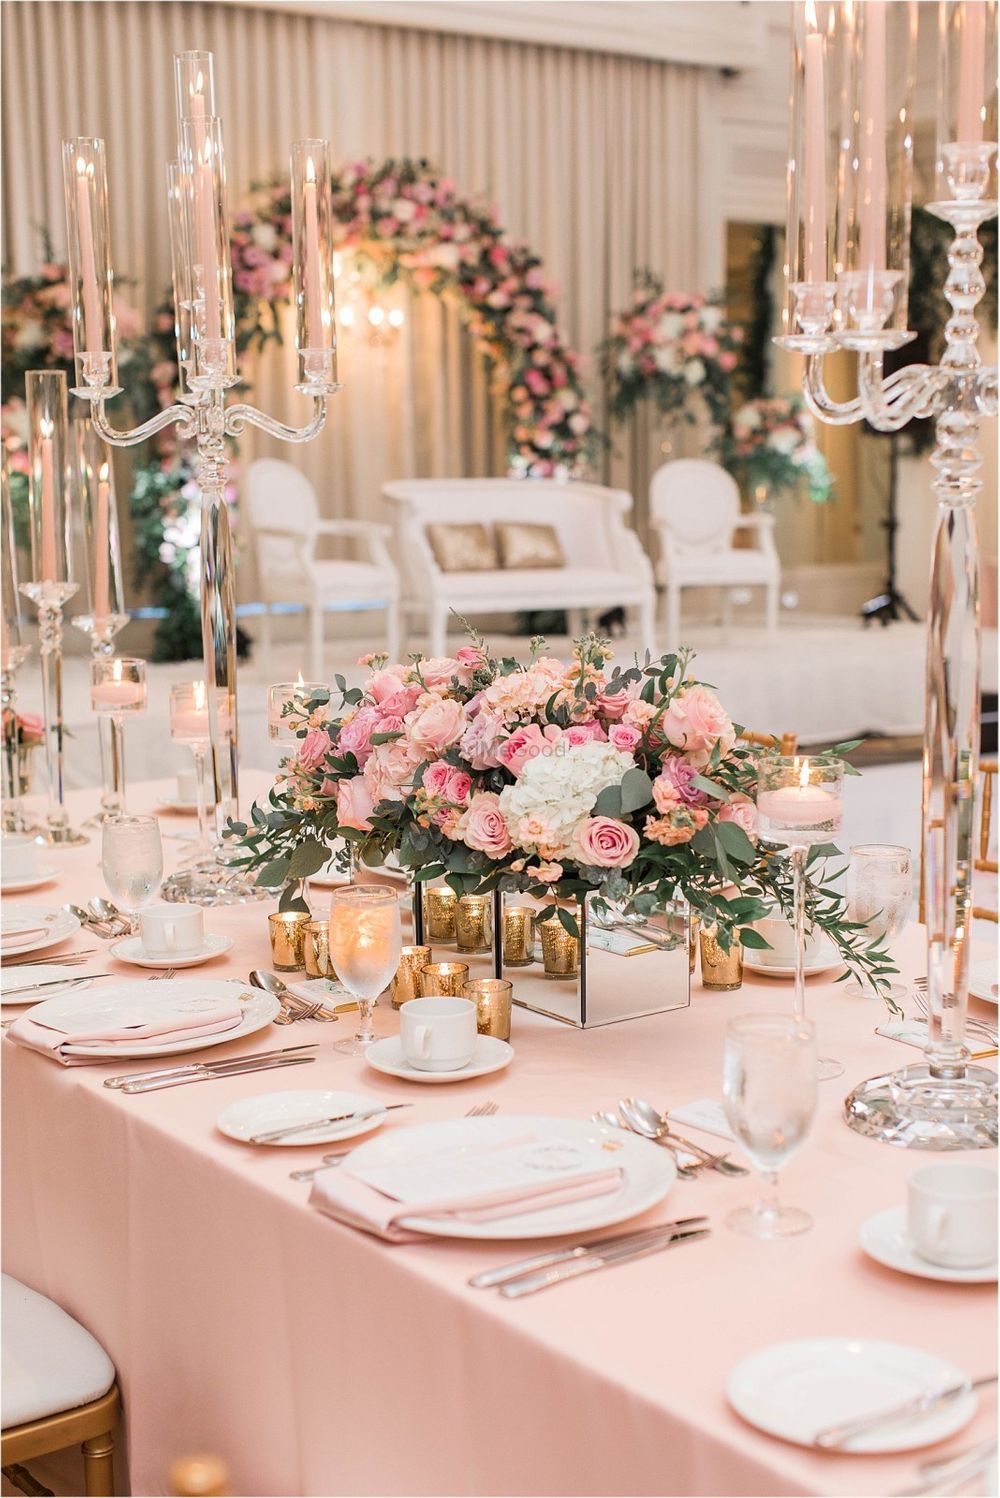 Photo of An elegant table setting decor with flowers and candles